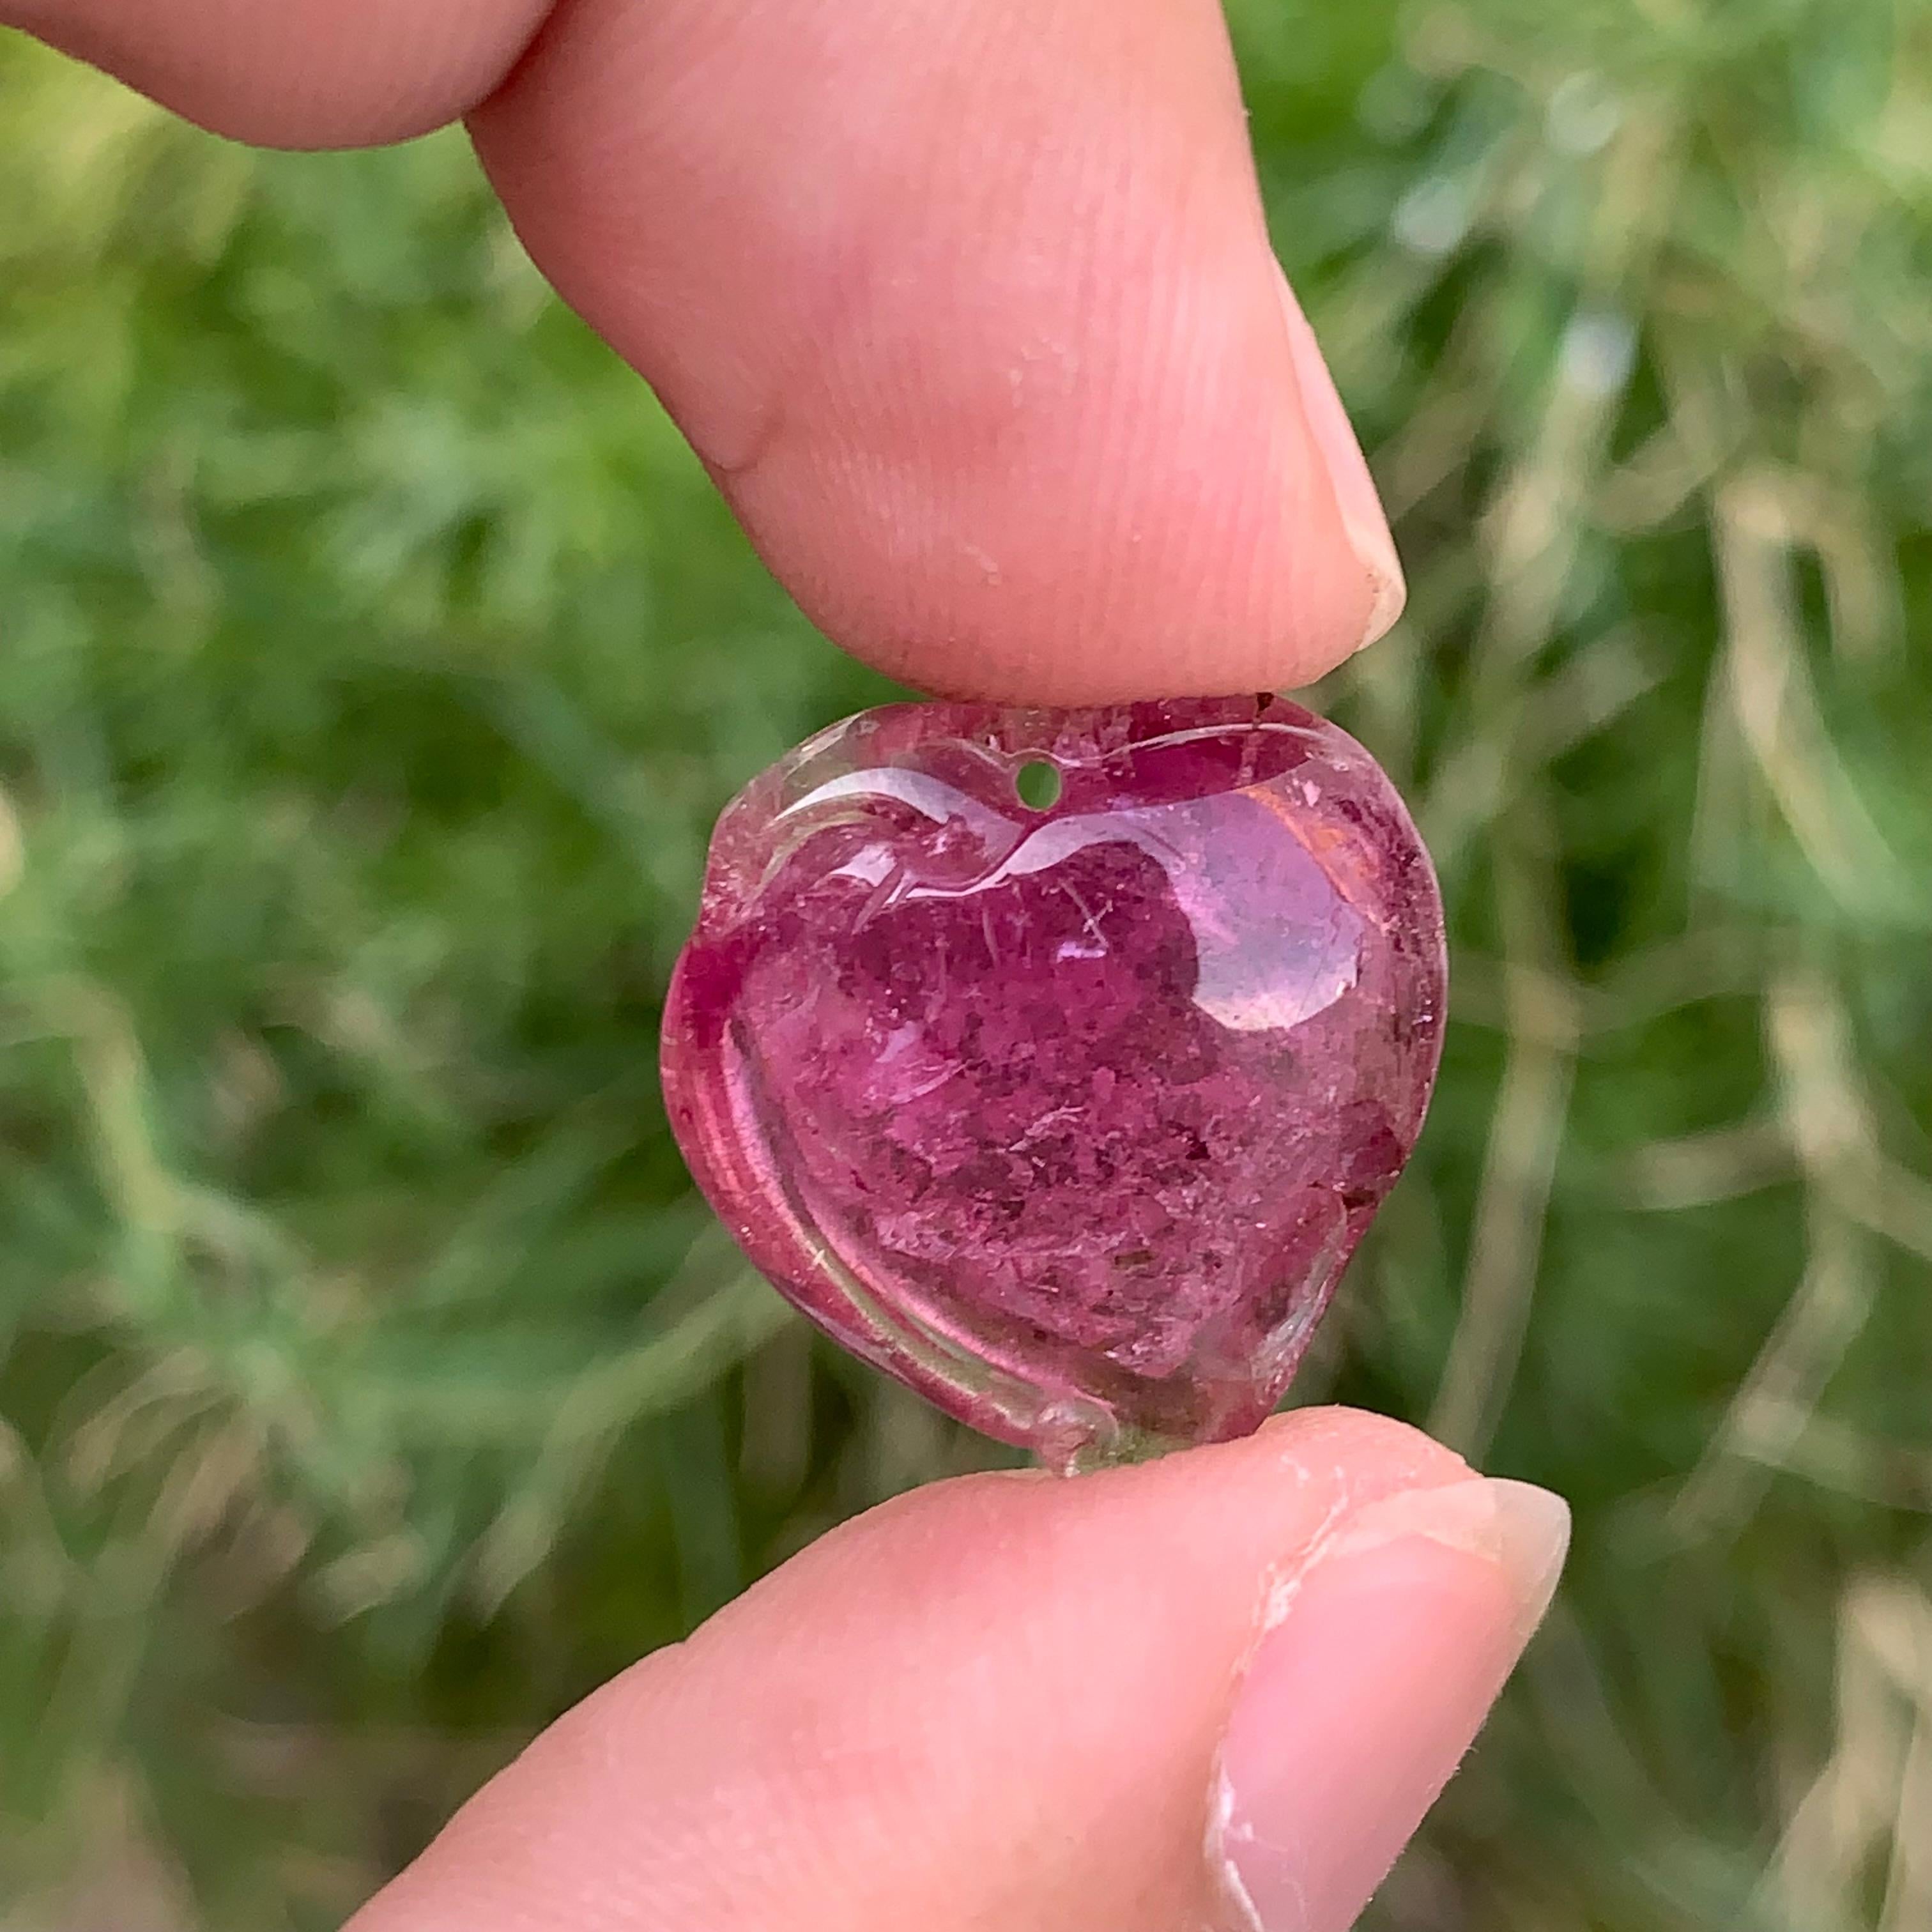 Carved 14.65 Carat Loose Heart Shape Tourmaline Drilled Carving from Africa For Sale